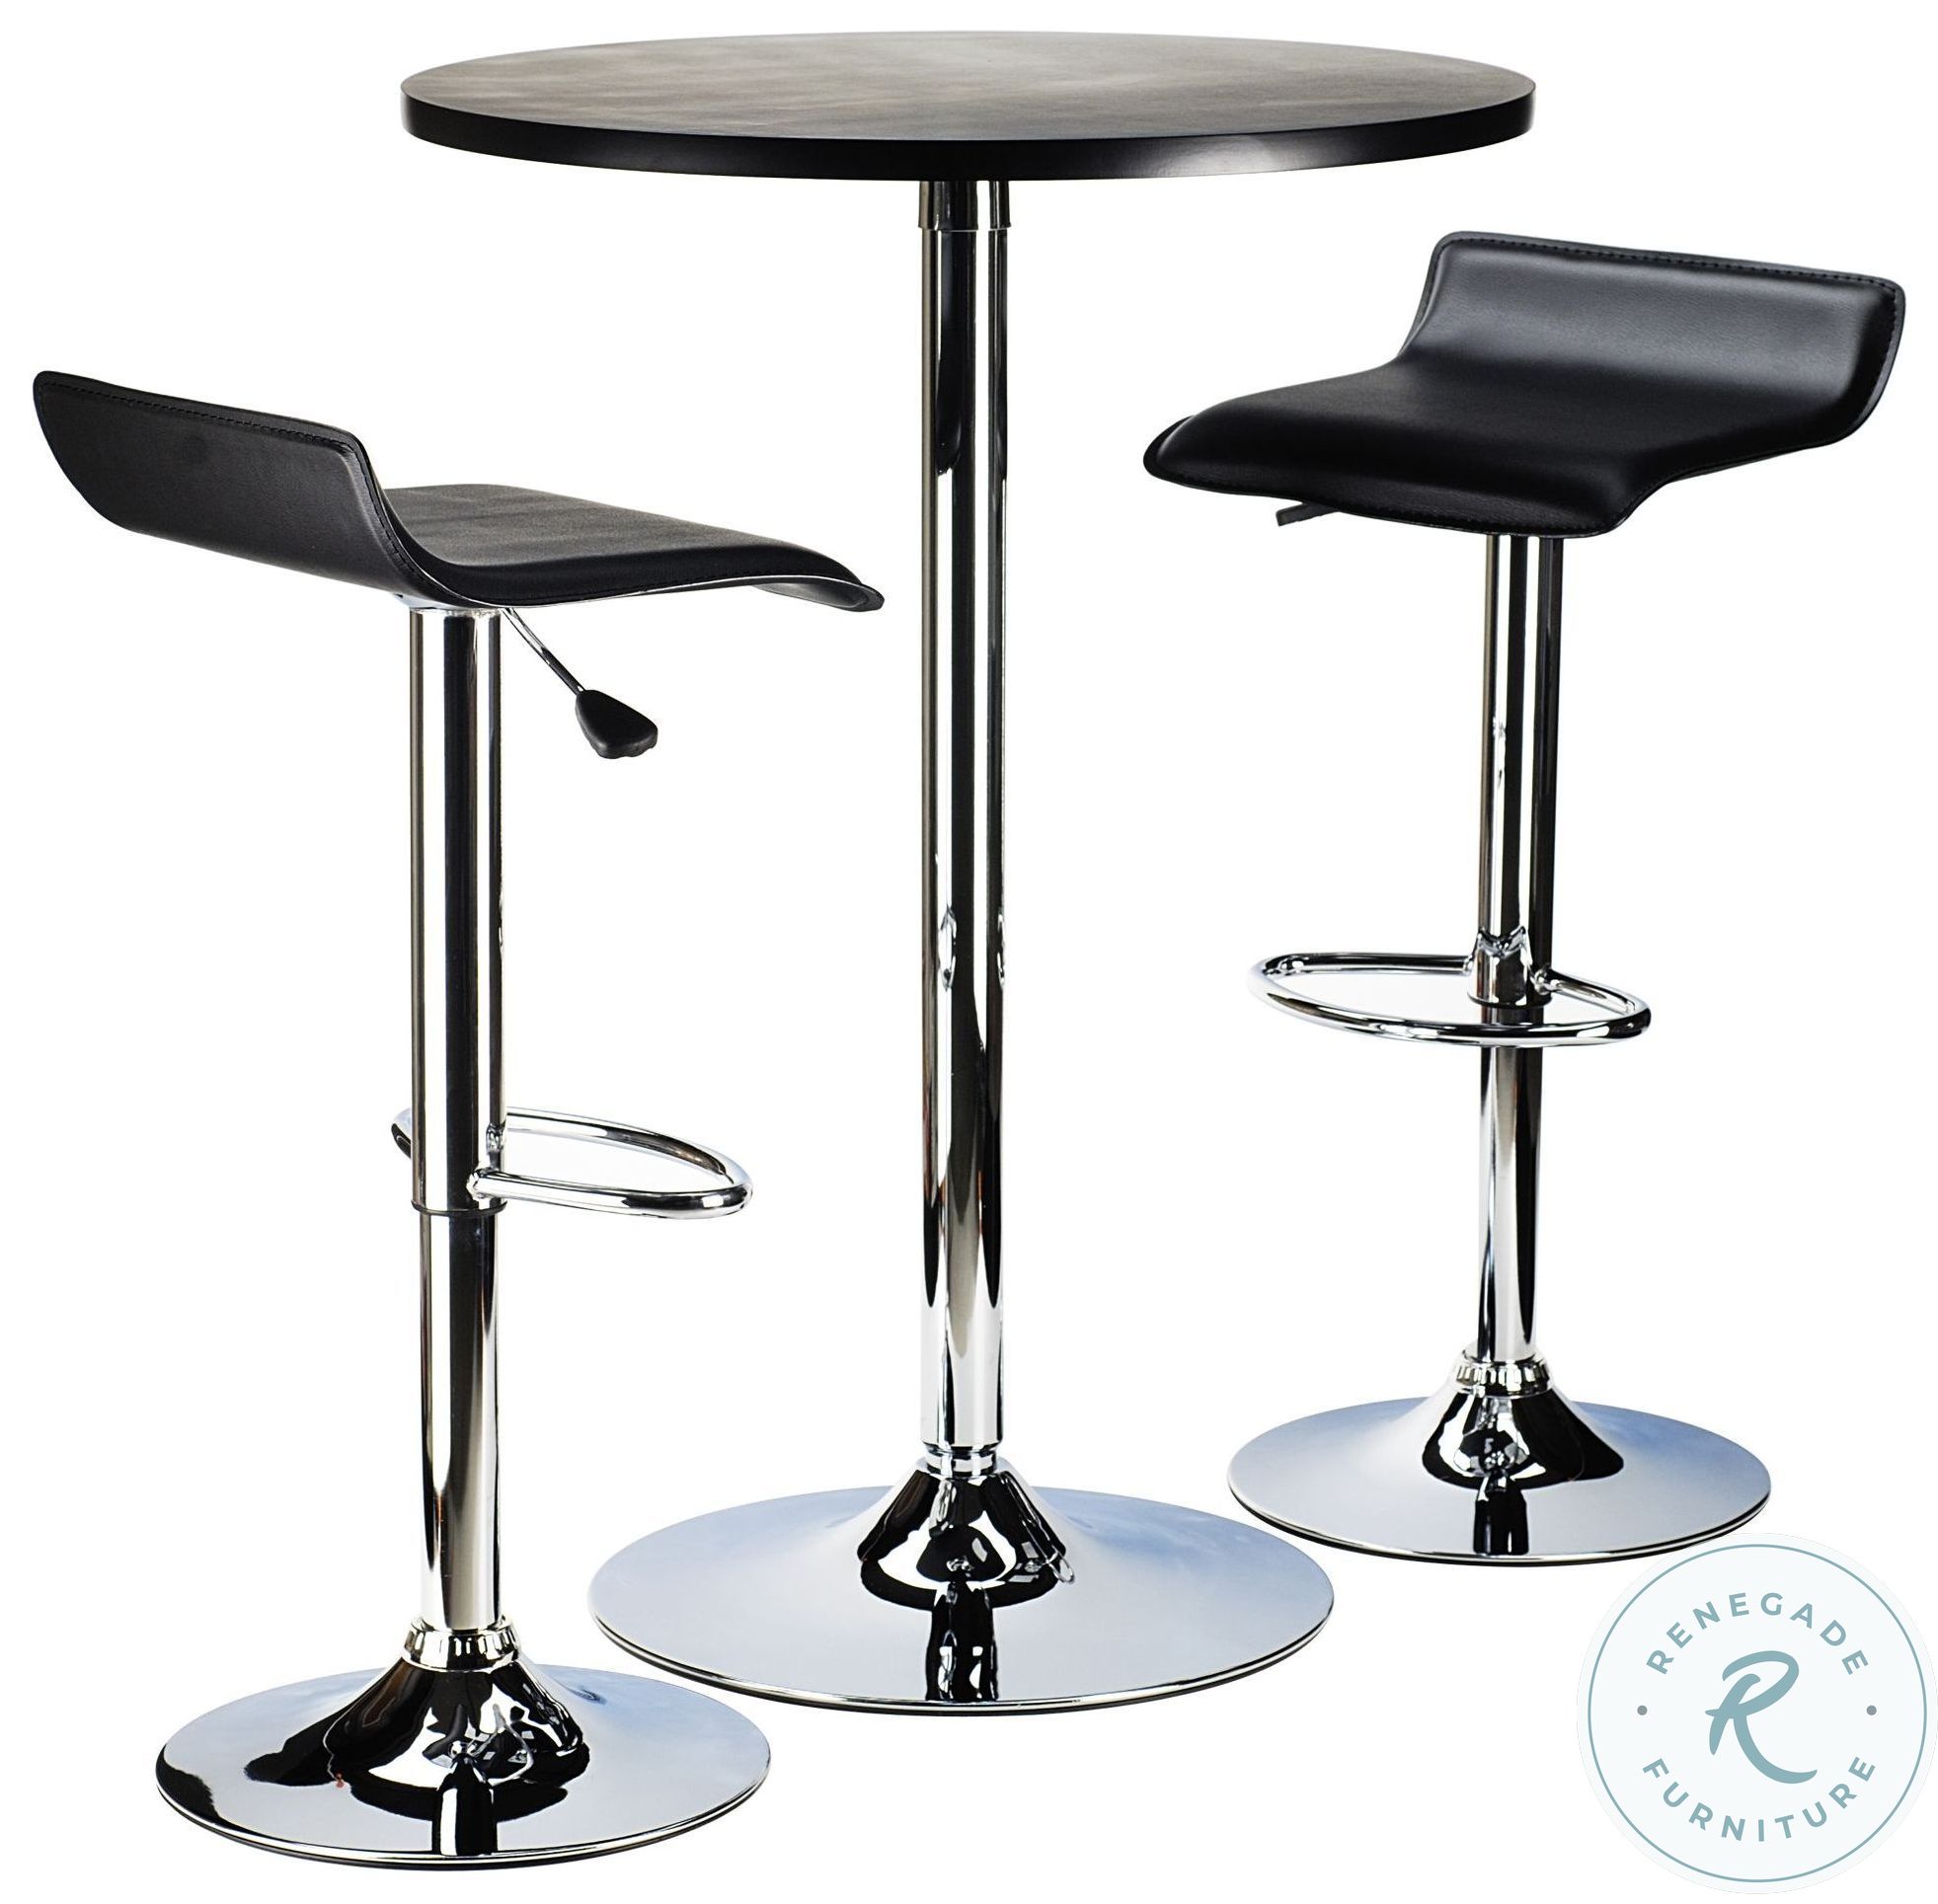 Spectrum Black 3 Piece 24" Round Pub Table Set with 2 Airlift Stool